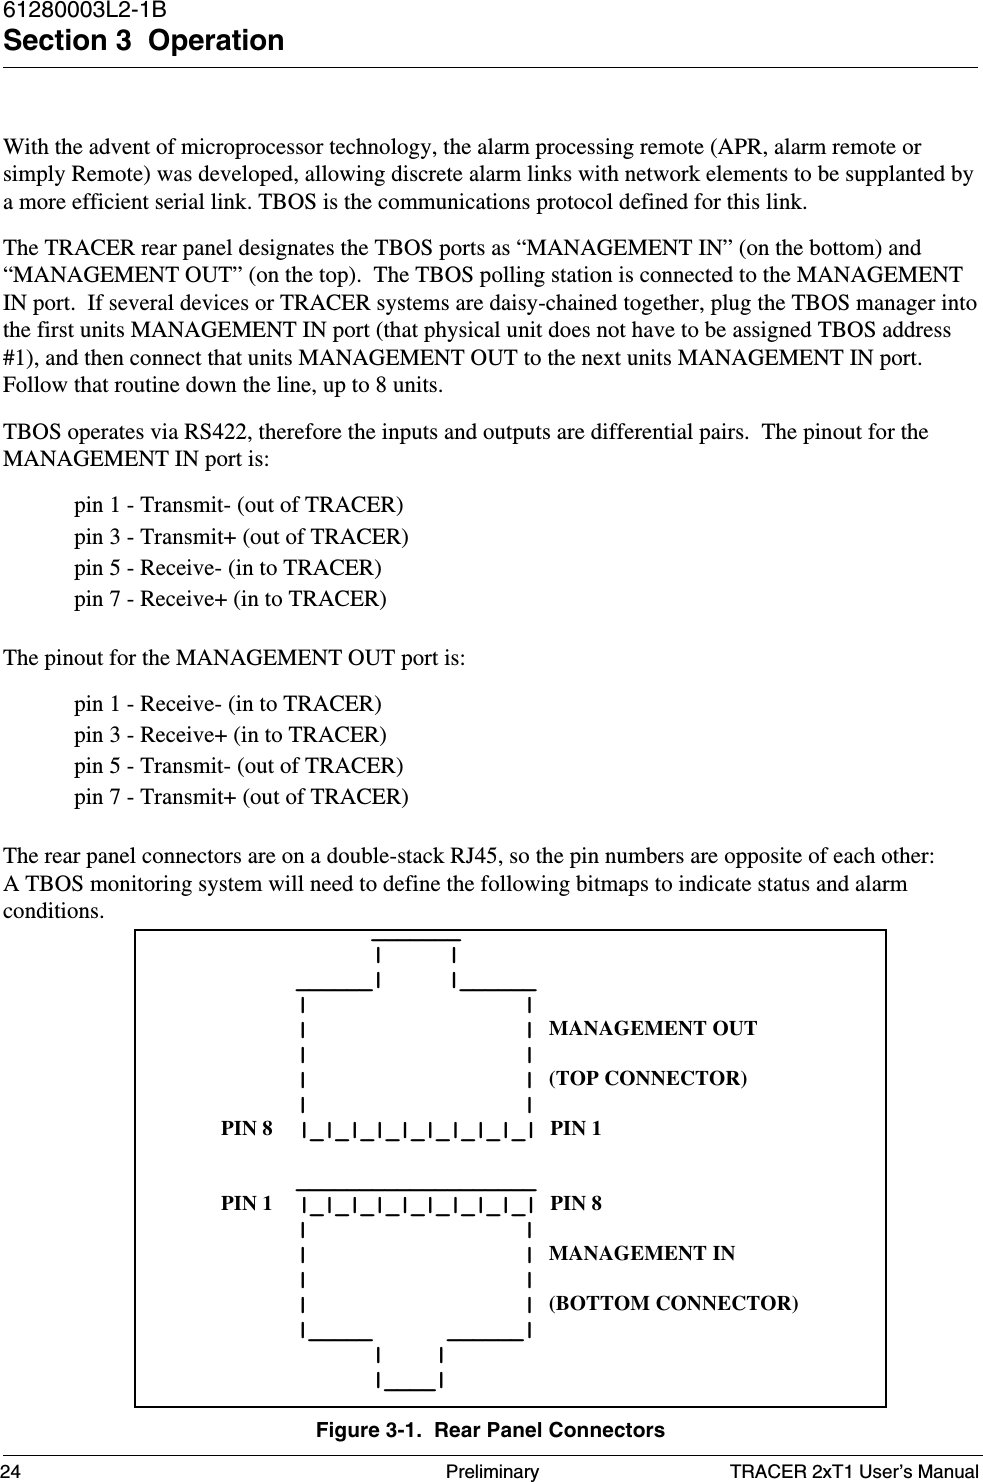 TRACER 2xT1 User’s Manual61280003L2-1BSection 3  Operation24 PreliminaryWith the advent of microprocessor technology, the alarm processing remote (APR, alarm remote orsimply Remote) was developed, allowing discrete alarm links with network elements to be supplanted bya more efficient serial link. TBOS is the communications protocol defined for this link.The TRACER rear panel designates the TBOS ports as “MANAGEMENT IN” (on the bottom) and“MANAGEMENT OUT” (on the top).  The TBOS polling station is connected to the MANAGEMENTIN port.  If several devices or TRACER systems are daisy-chained together, plug the TBOS manager intothe first units MANAGEMENT IN port (that physical unit does not have to be assigned TBOS address#1), and then connect that units MANAGEMENT OUT to the next units MANAGEMENT IN port.Follow that routine down the line, up to 8 units.TBOS operates via RS422, therefore the inputs and outputs are differential pairs.  The pinout for theMANAGEMENT IN port is:pin 1 - Transmit- (out of TRACER)pin 3 - Transmit+ (out of TRACER)pin 5 - Receive- (in to TRACER)pin 7 - Receive+ (in to TRACER)The pinout for the MANAGEMENT OUT port is:pin 1 - Receive- (in to TRACER)pin 3 - Receive+ (in to TRACER)pin 5 - Transmit- (out of TRACER)pin 7 - Transmit+ (out of TRACER)The rear panel connectors are on a double-stack RJ45, so the pin numbers are opposite of each other:A TBOS monitoring system will need to define the following bitmaps to indicate status and alarmconditions.Figure 3-1.  Rear Panel Connectors            _______            |     |      ______|     |______      |                 |      |                 | MANAGEMENT OUT      |                 |      |                 | (TOP CONNECTOR)      |                 |PIN 8  |_|_|_|_|_|_|_|_|_| PIN 1      ___________________PIN 1  |_|_|_|_|_|_|_|_|_| PIN 8      |                 |      |                 | MANAGEMENT IN      |                 |      |                 | (BOTTOM CONNECTOR)      |_____      ______|            |    |            |____|